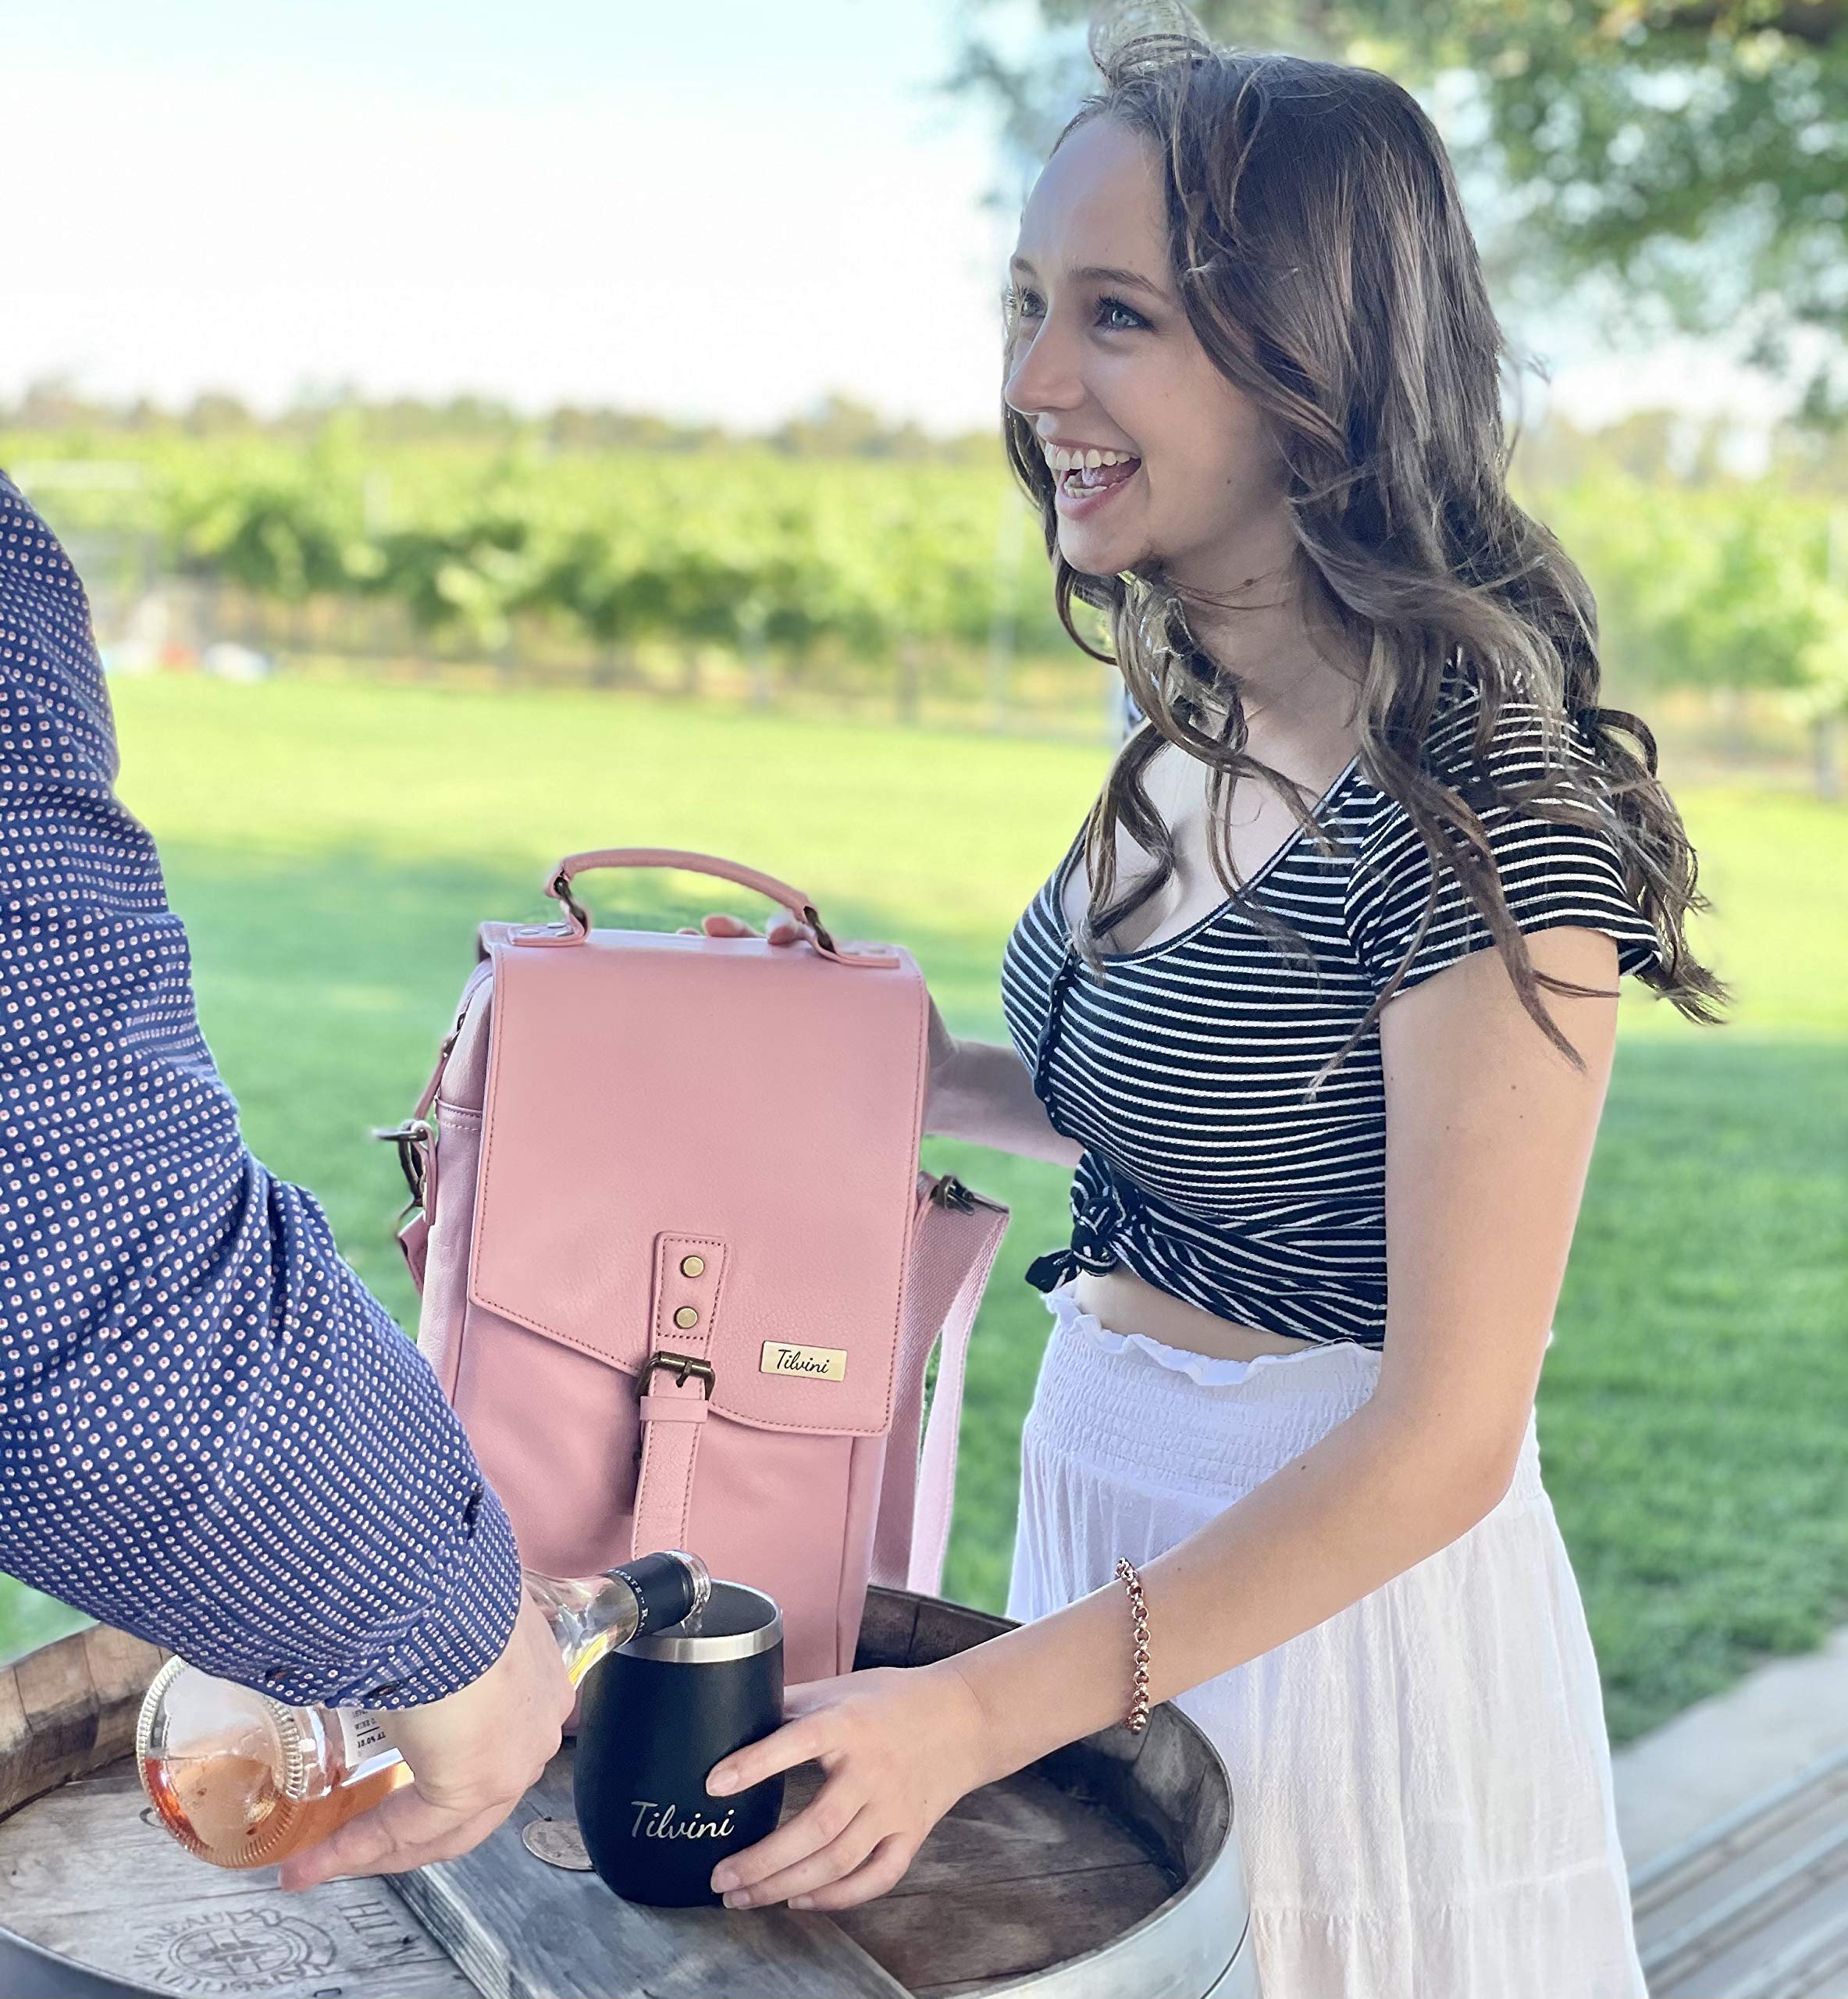 Tilvini Insulated Genuine Leather Wine Tote Bag With 2 Wine Tumblers. Wine Cooler Bag 2 Bottle Wine Carrier Set. Barbie Pink Bag. Wine Purse For Women. Mom Birthday Gift Bachelorette Party Wife Picnic